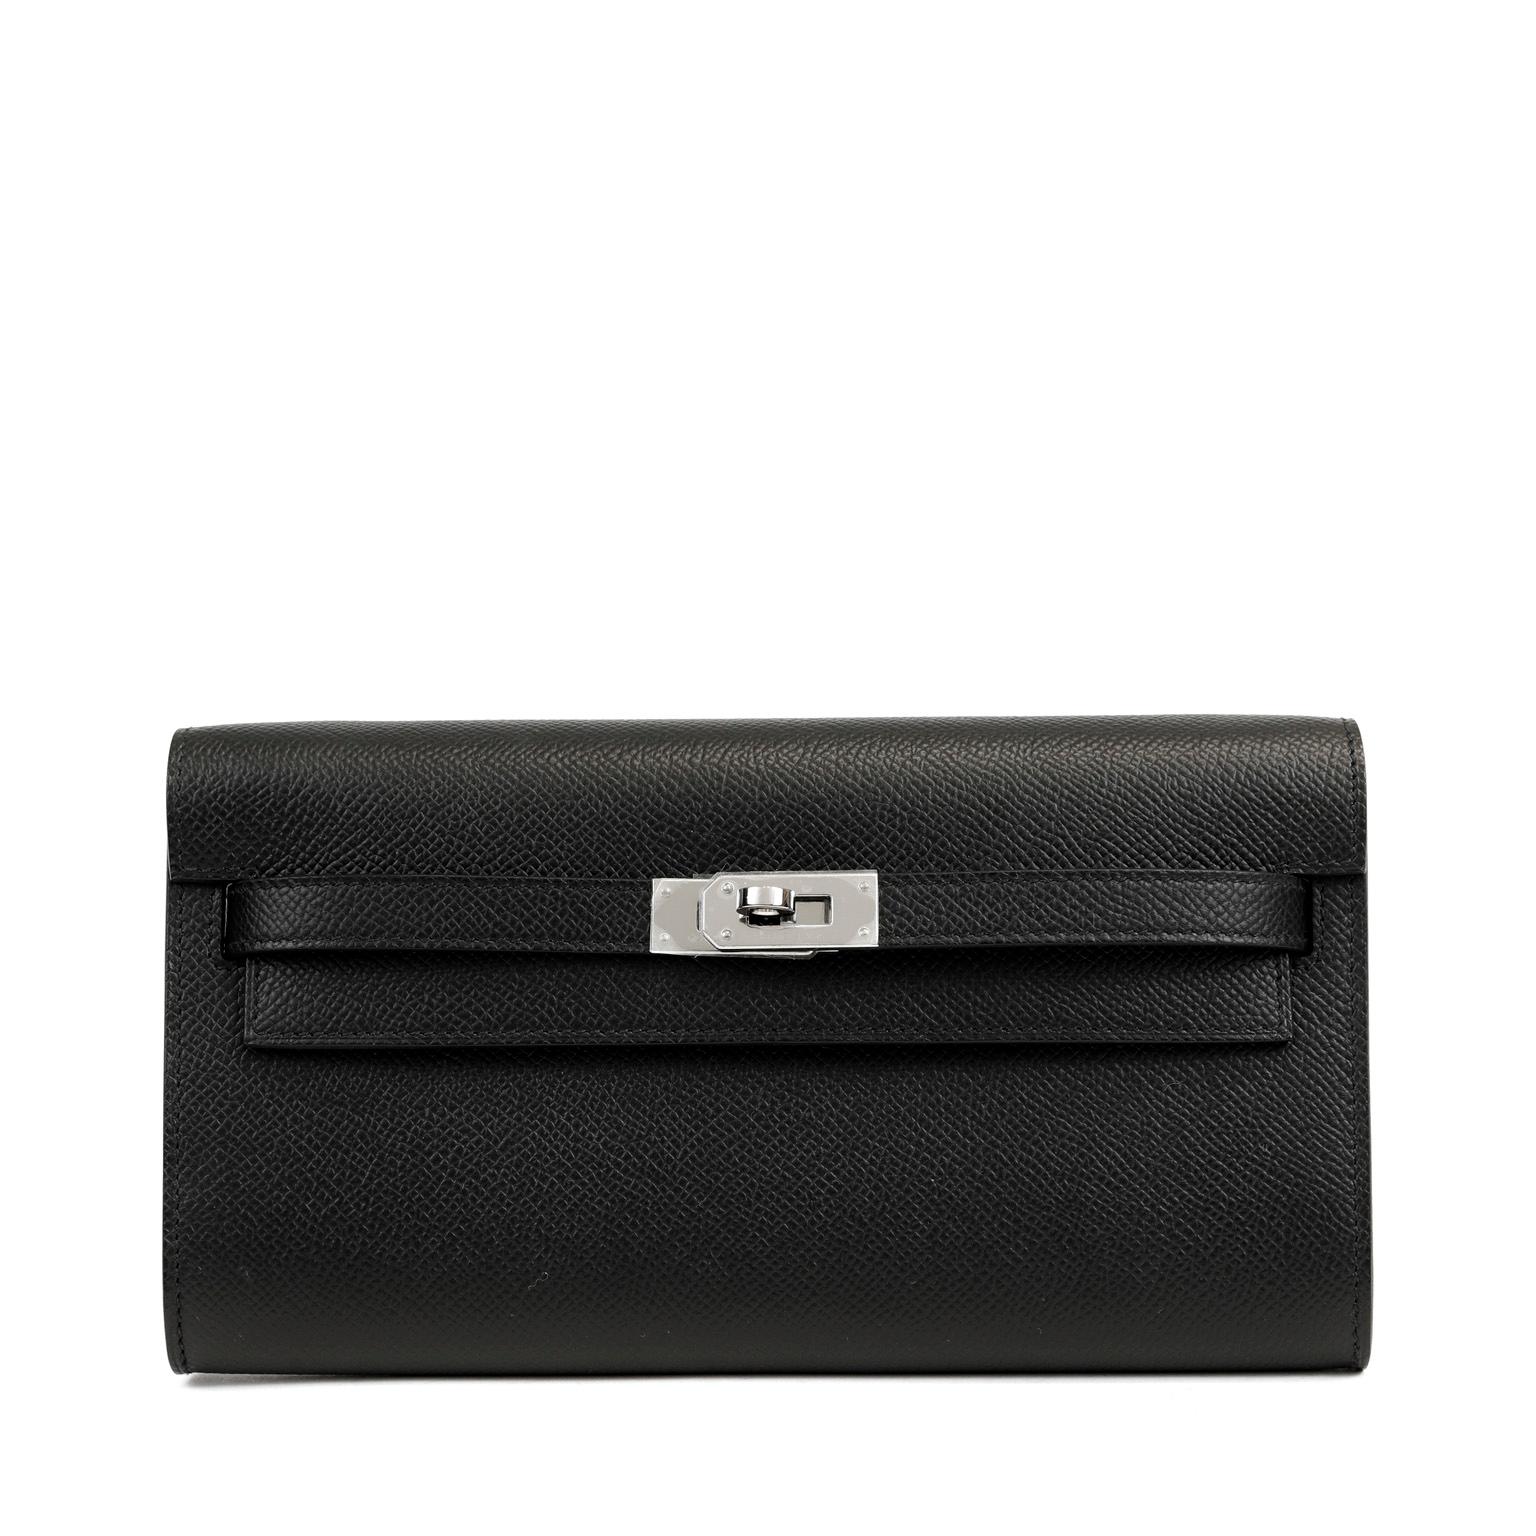 This authentic Hermès Black Epsom Kelly To Go Wallet is in pristine unworn condition with the protective plastic intact on the Palladium hardware.  Sleek, stylish and versatile, the To Go Wallet functions a cross body bag as well as a holder for